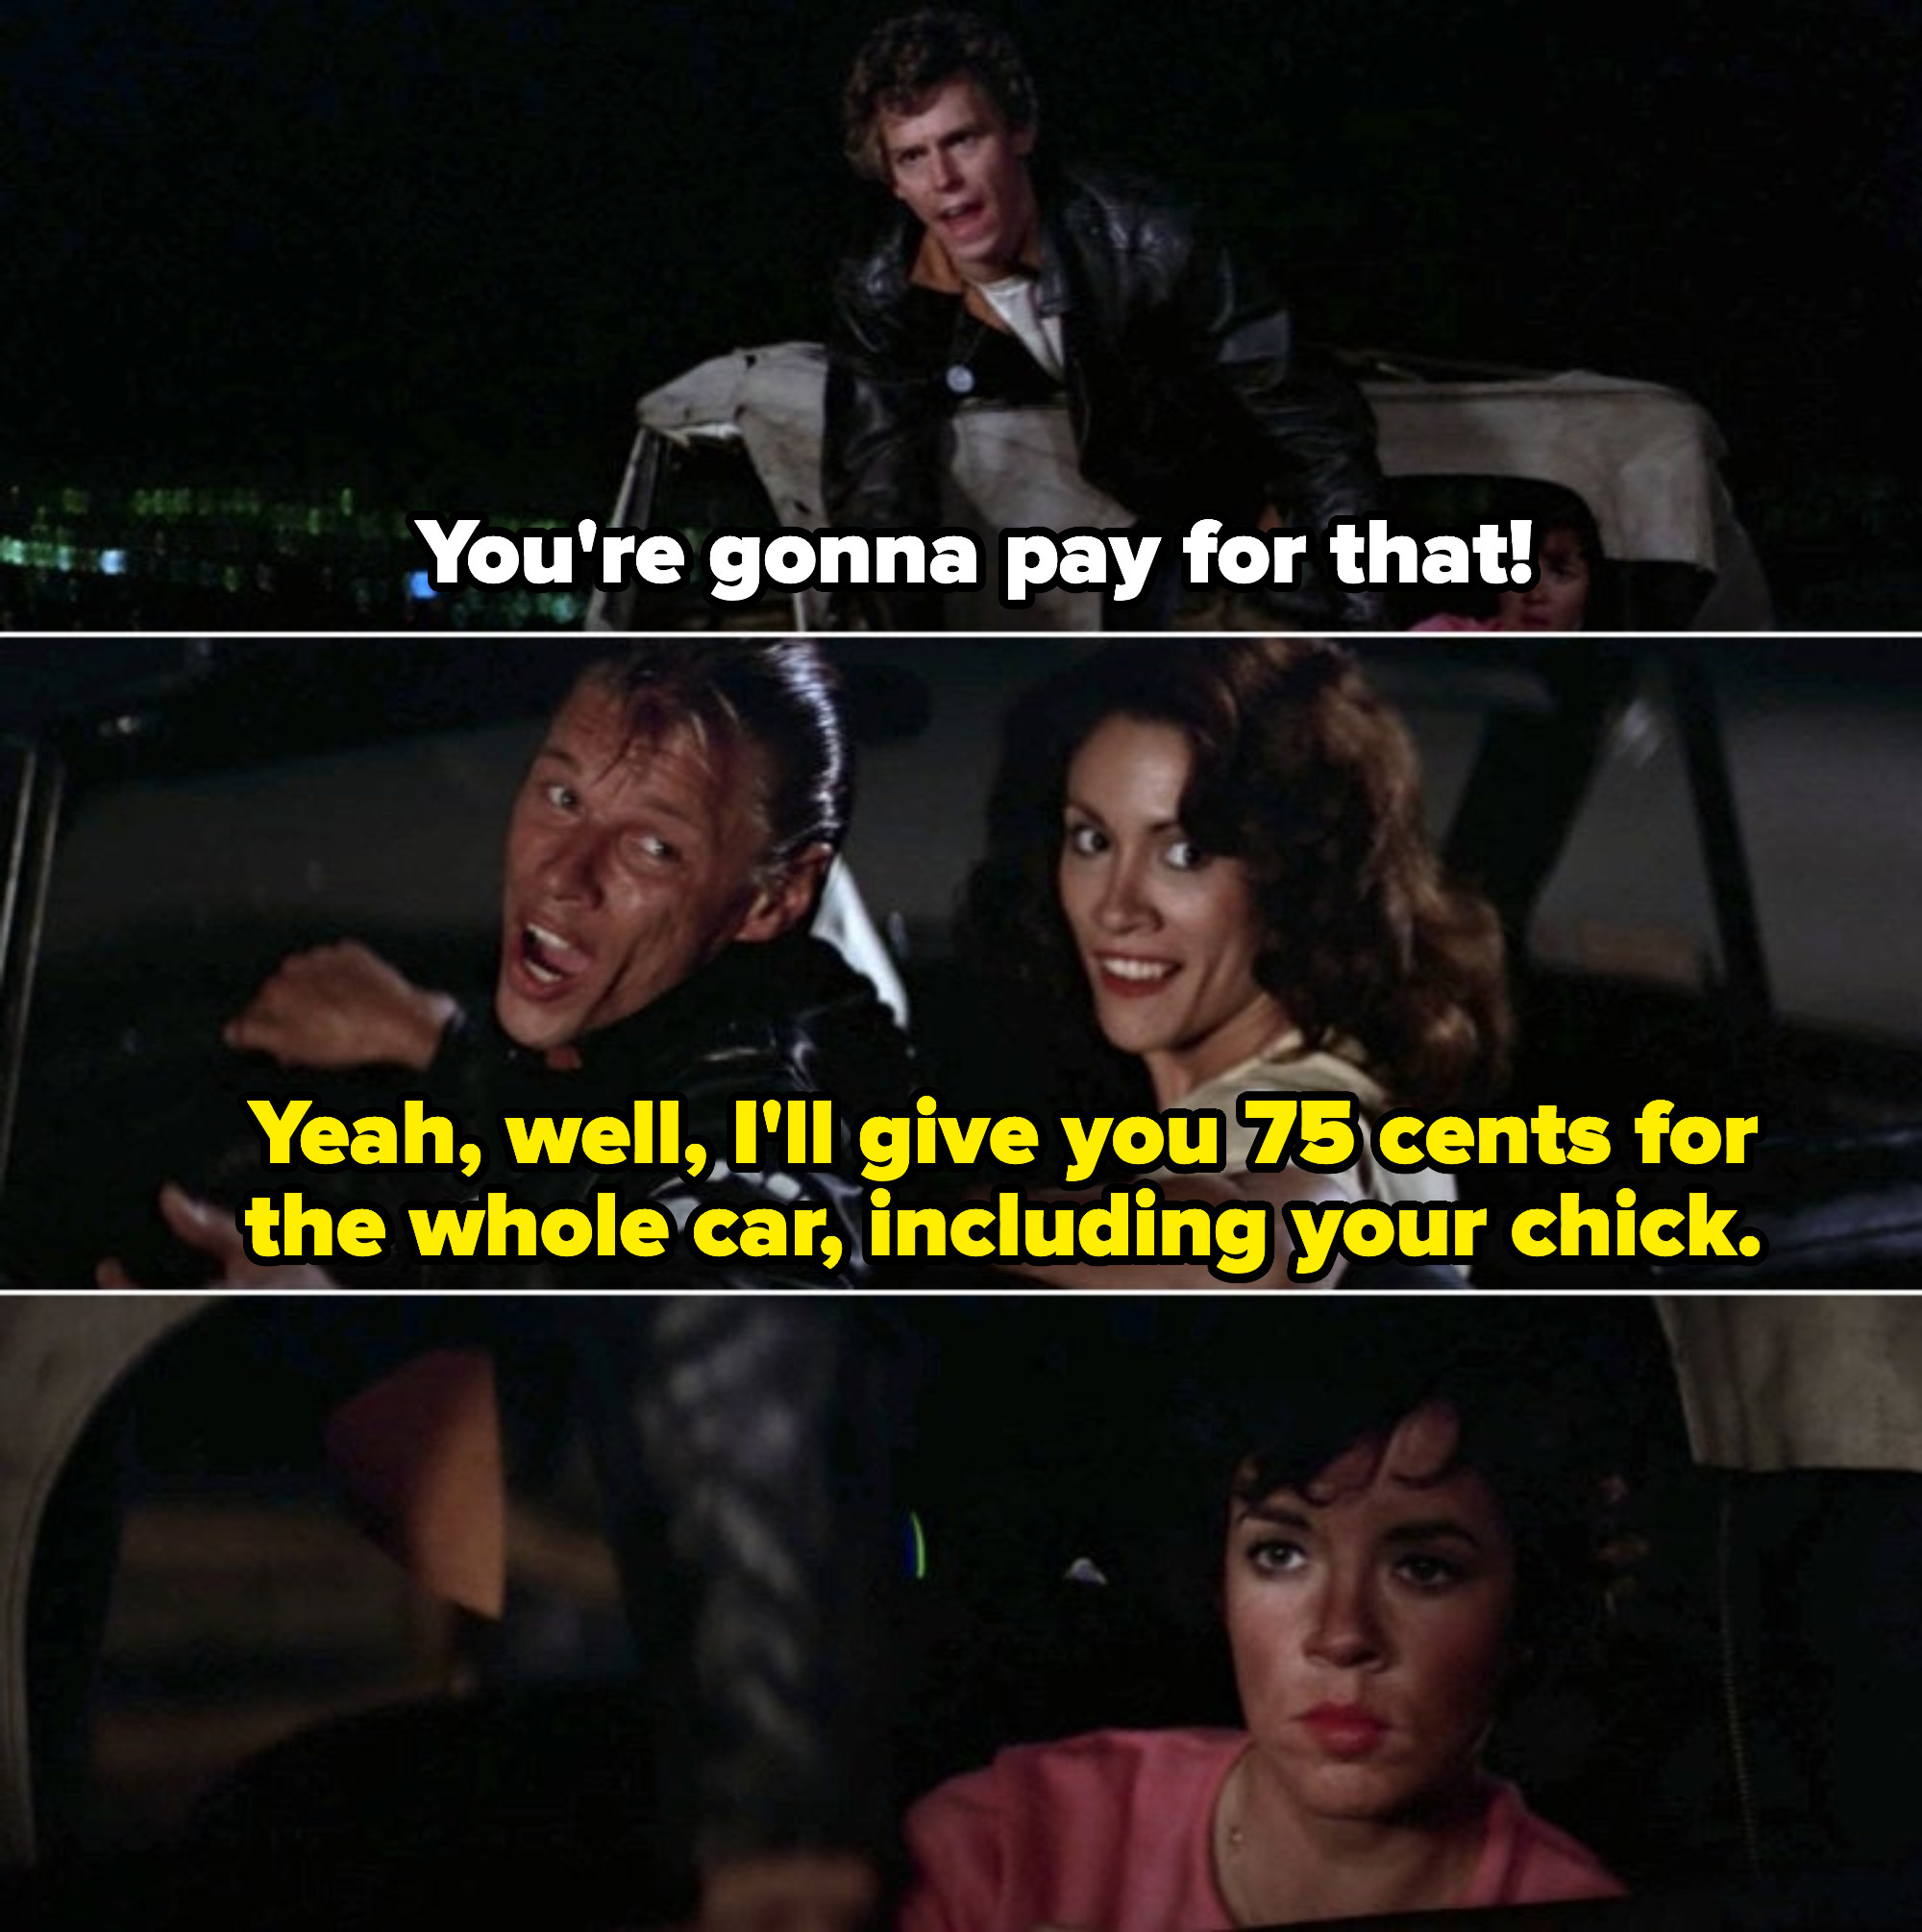 Kenickie: &quot;You&#x27;re gonna pay for that!&quot; Crater-Face: &quot;Yeah, well, I&#x27;ll give you 75 cents for the whole car, including your chick&quot;